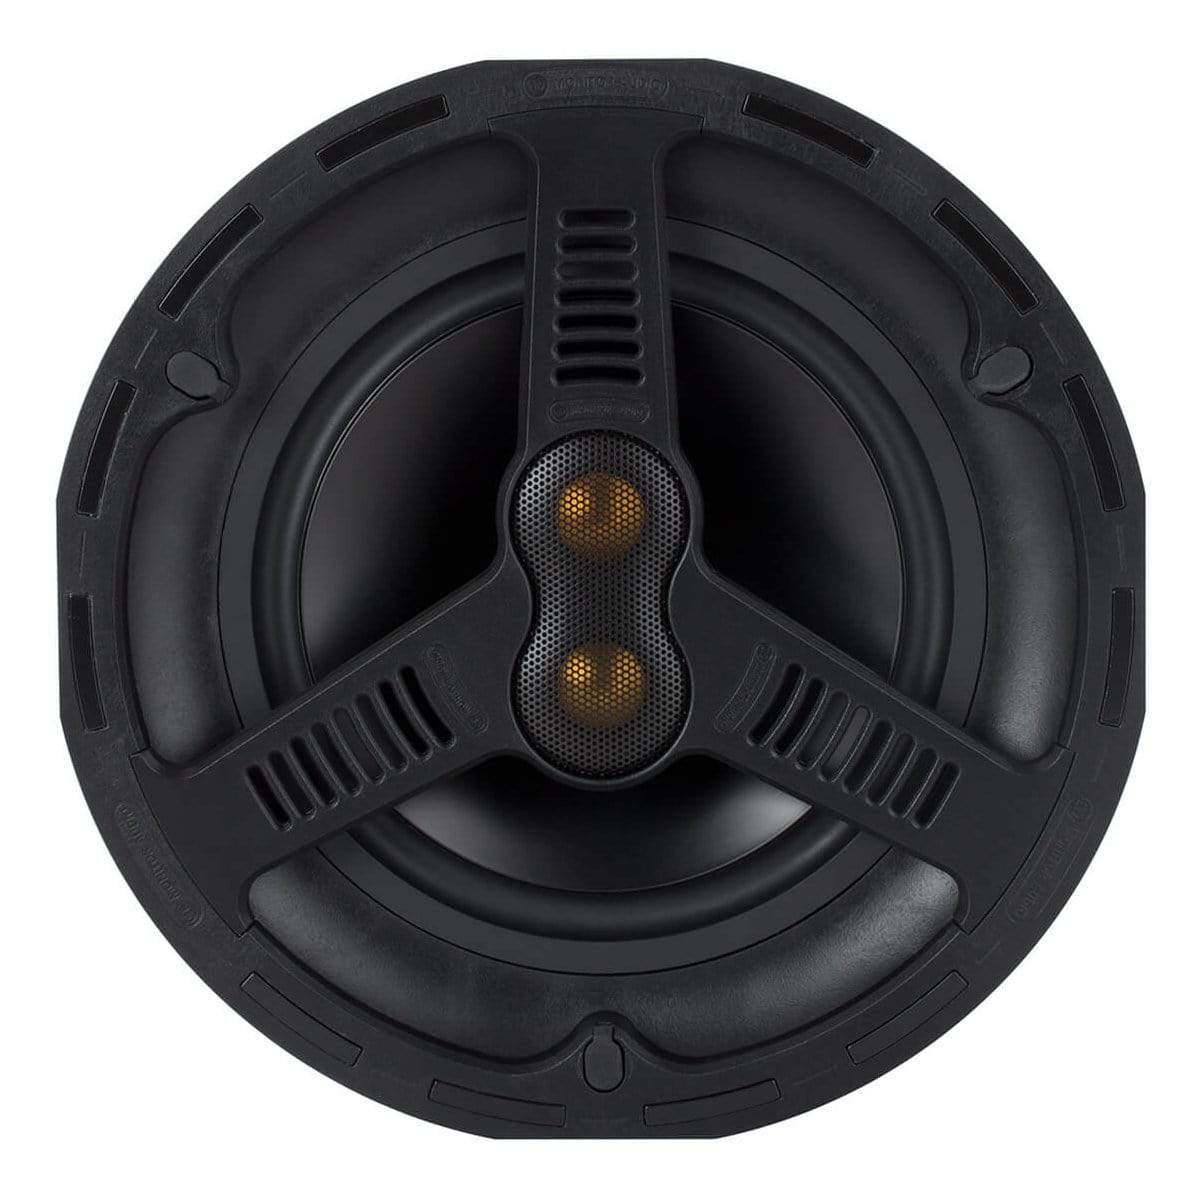 Monitor Audio AWC280-T2 Outdoor In-Ceiling Speaker